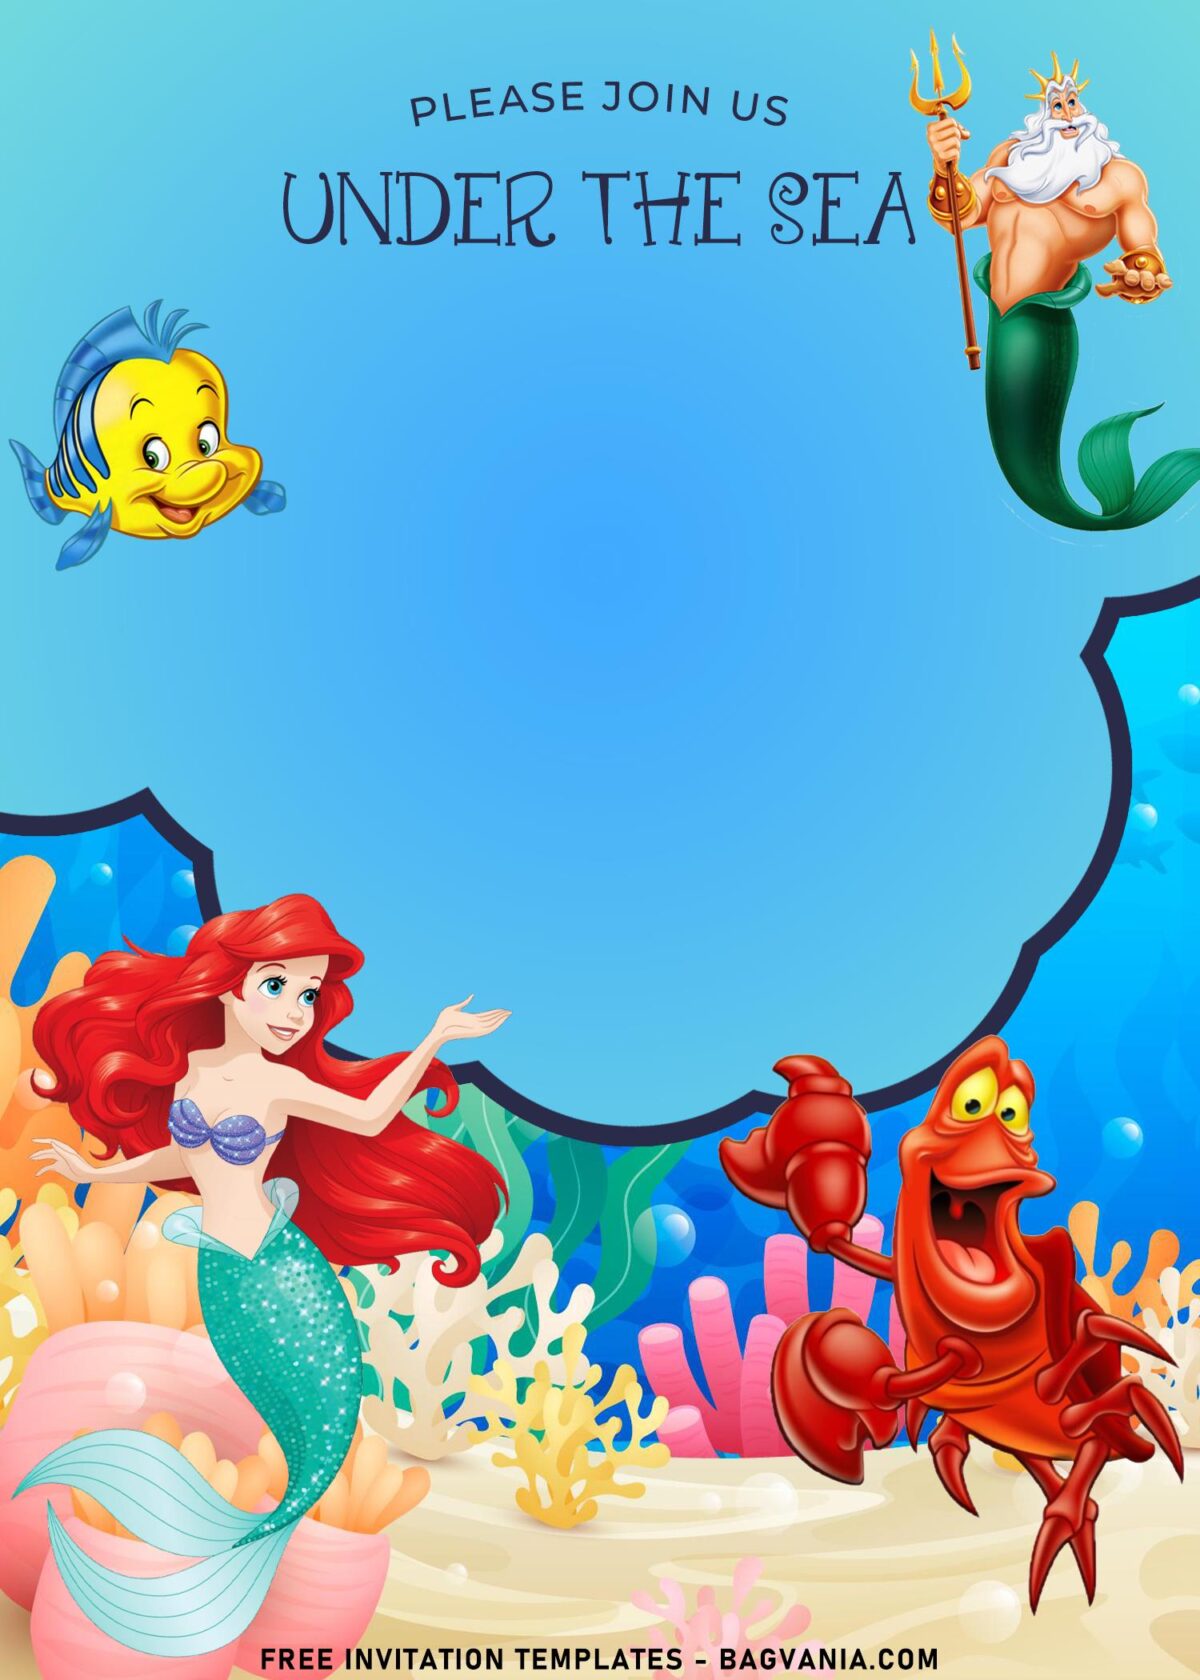 8+ Adorable Princess Ariel Invitation Templates With Flounder And Sebastian with blue ocean background